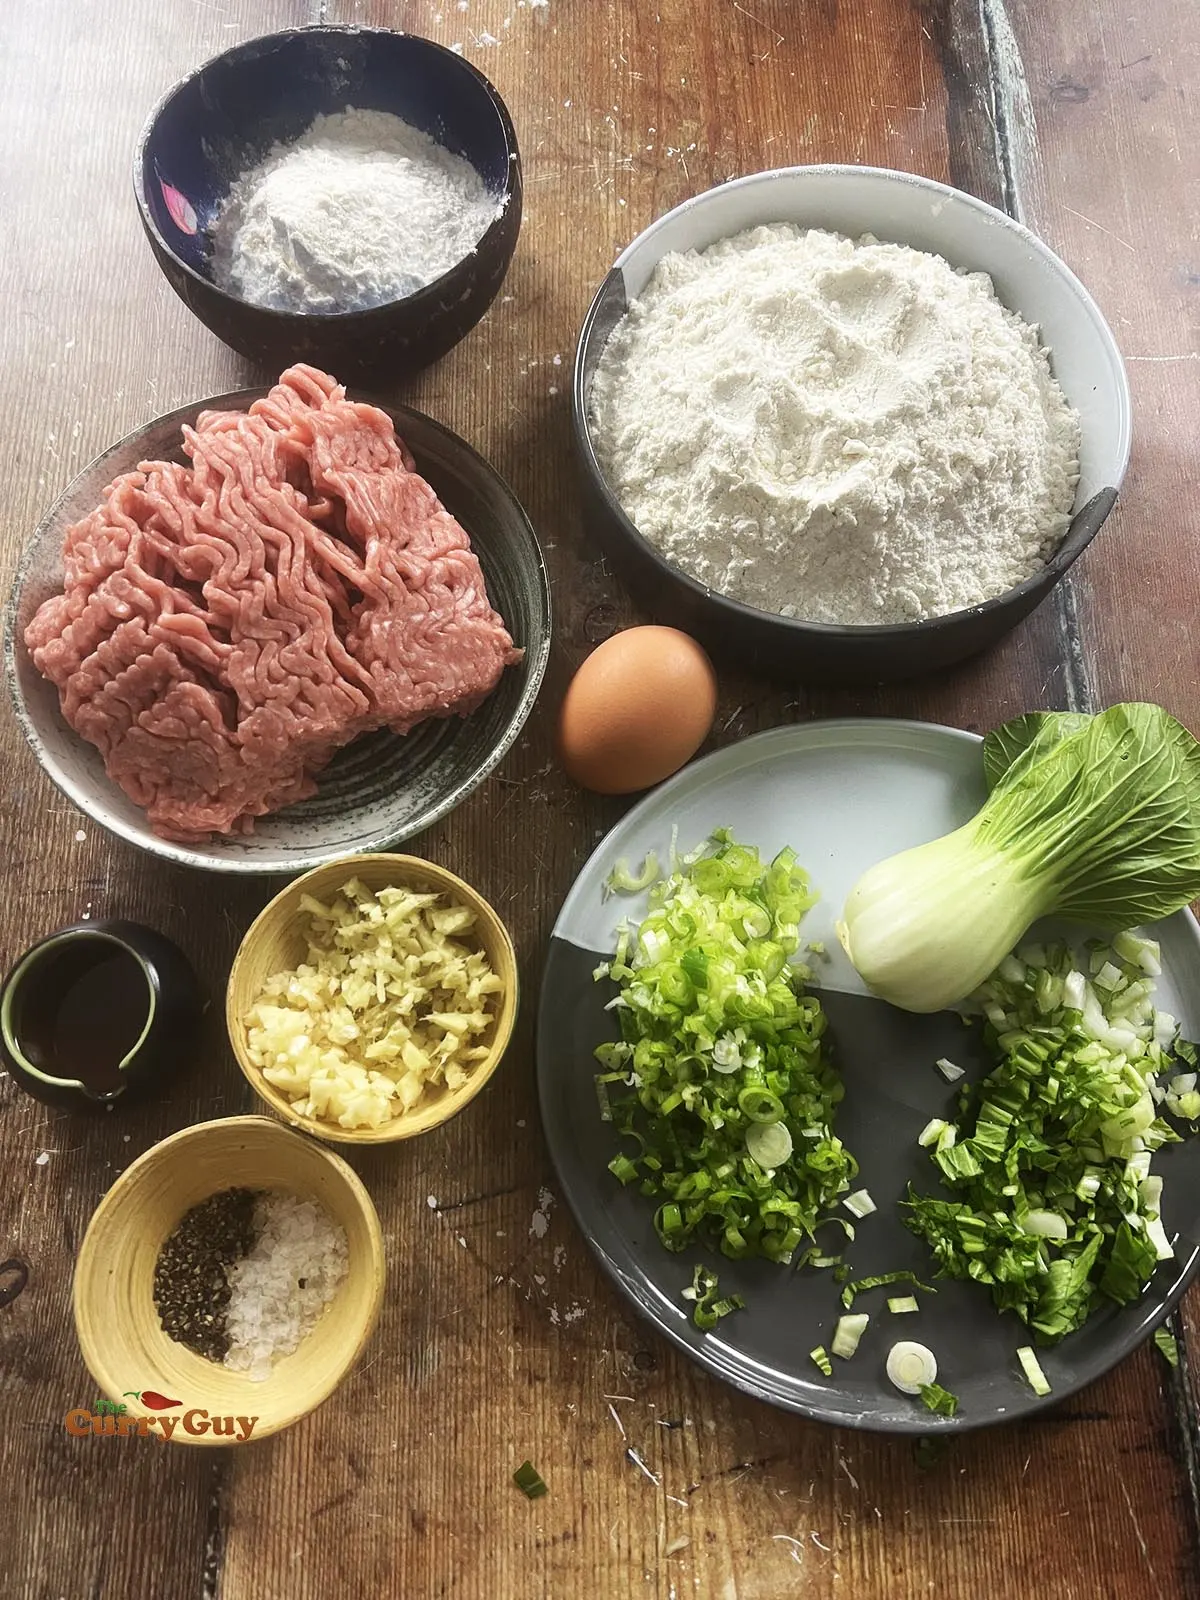 Ingredients for Chinese chicken potstickers